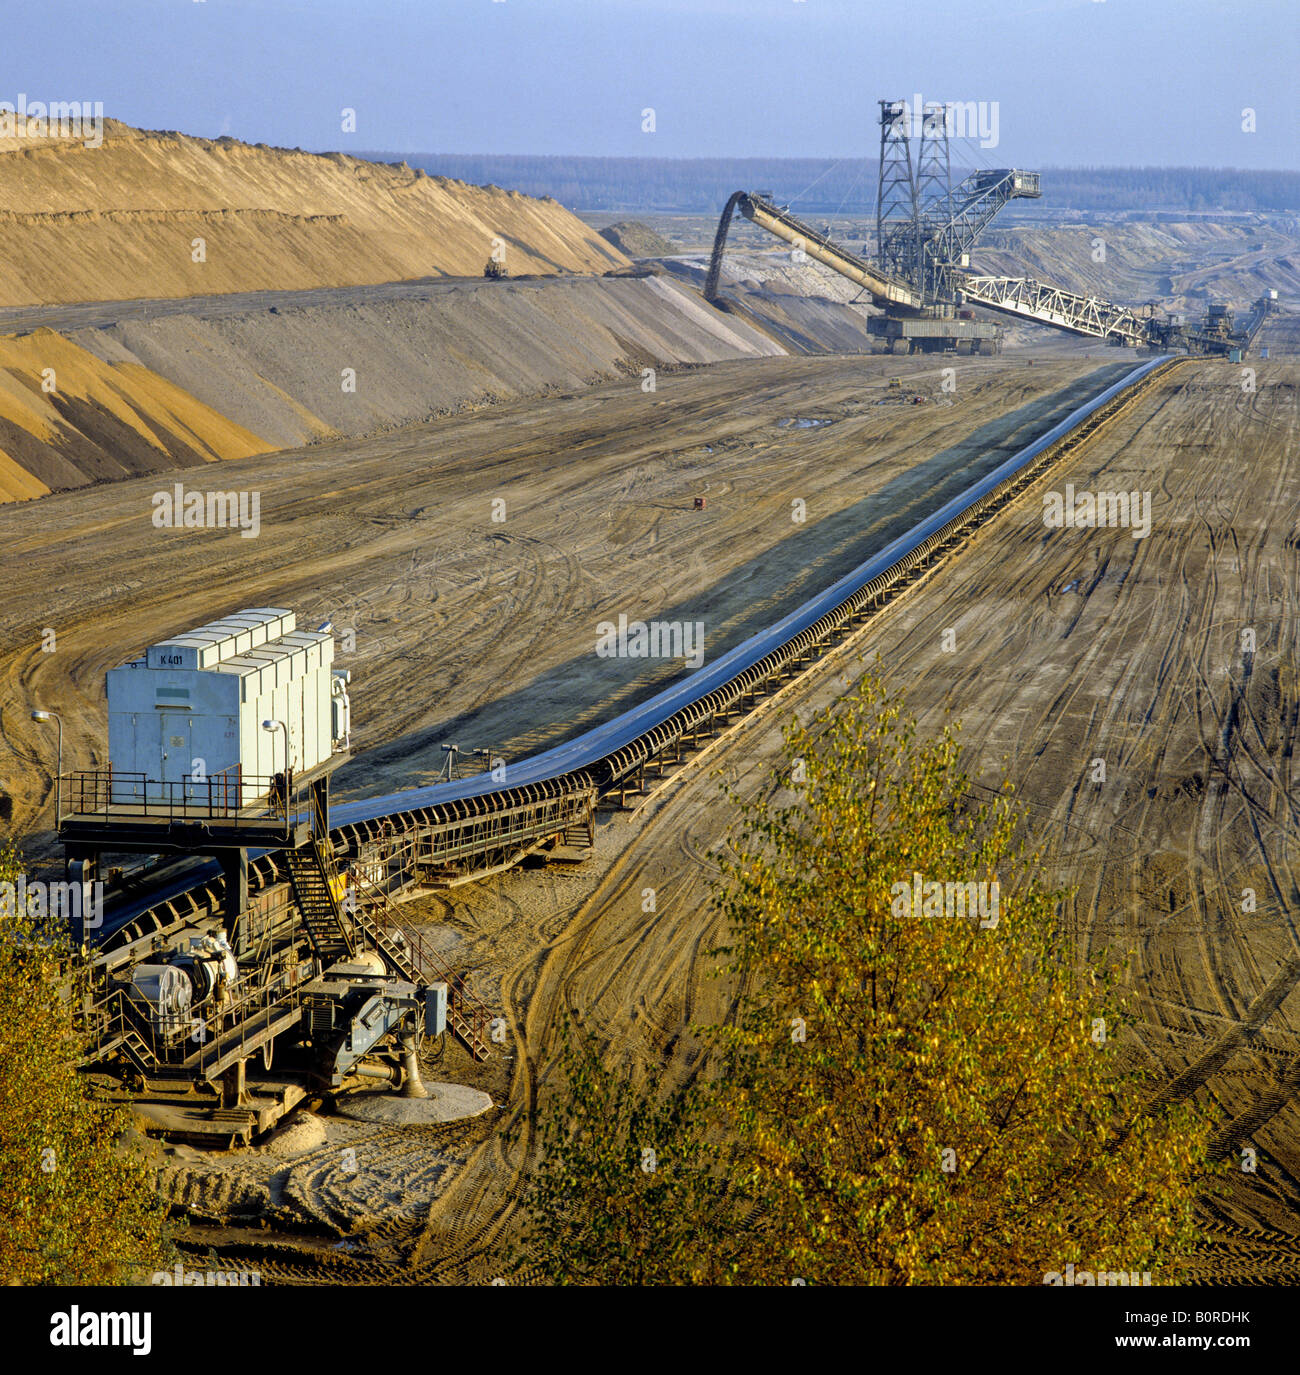 picture from 2000 recultivation of lignite coal opencast pit mining mining of frechen county of northrhine westphalia germany Stock Photo